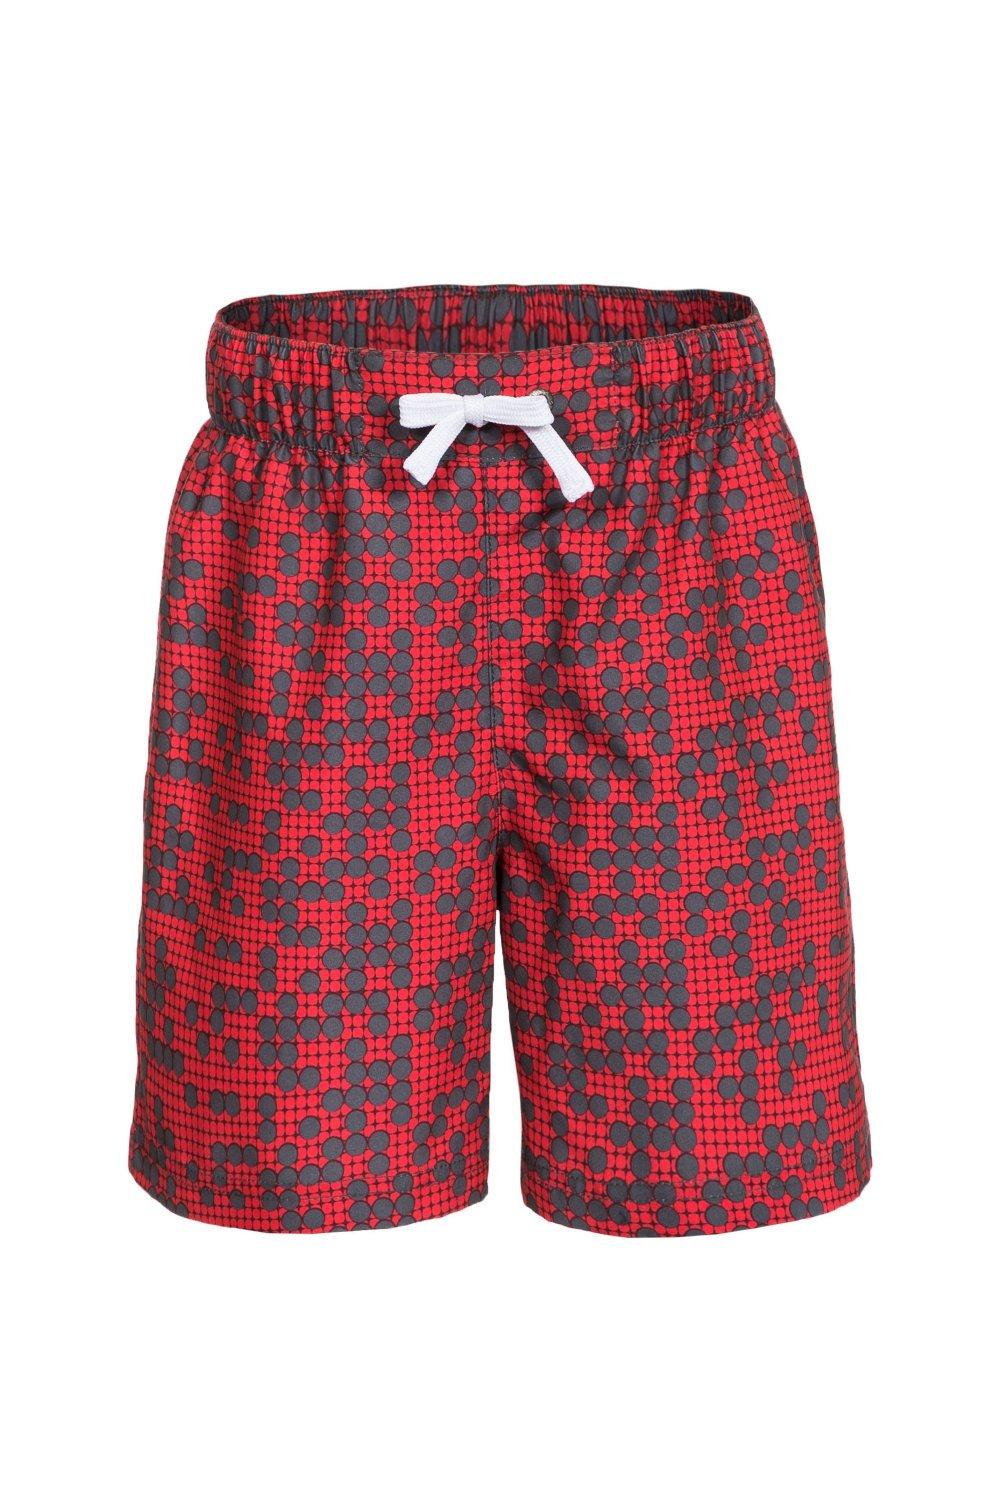 Alley Swimming Shorts